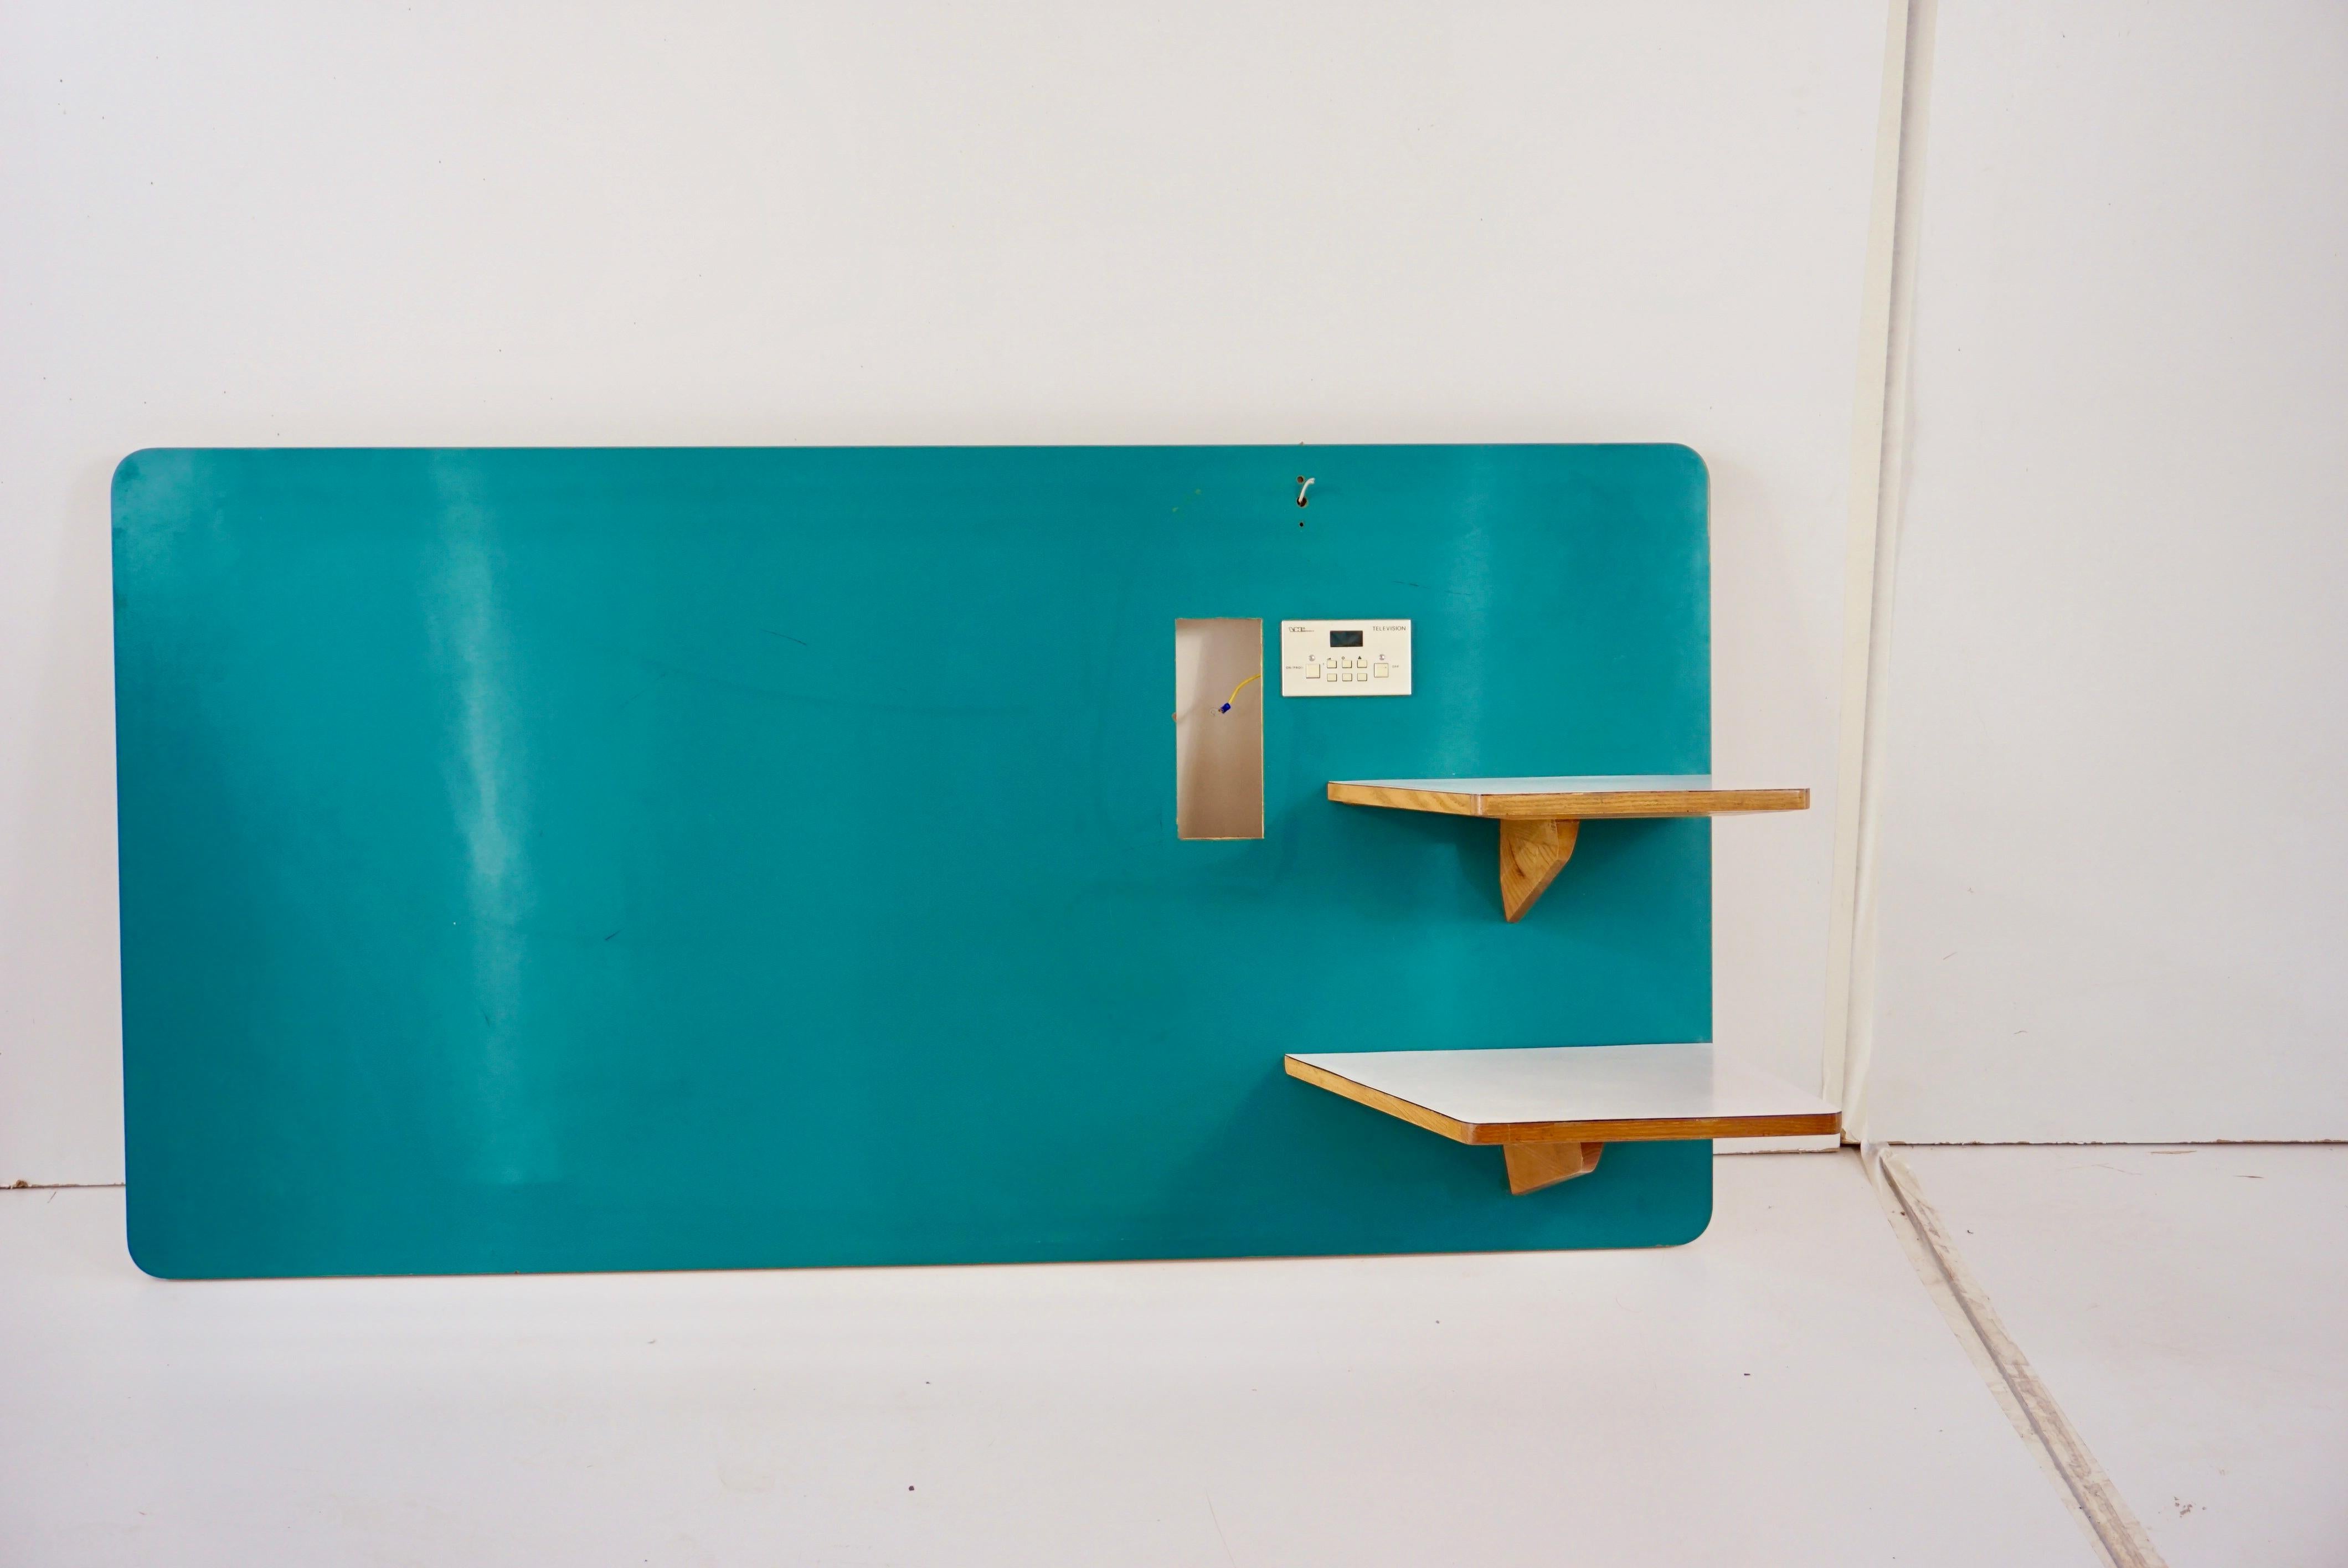 A single Gio Ponti formica and brushed metal headboard
from the Hotel Parco dei Principi, Roma 1964.
with two angular shelves.original tv plate controller and a hole for electrical outlets
white and green laminate
manufactured by Giordano